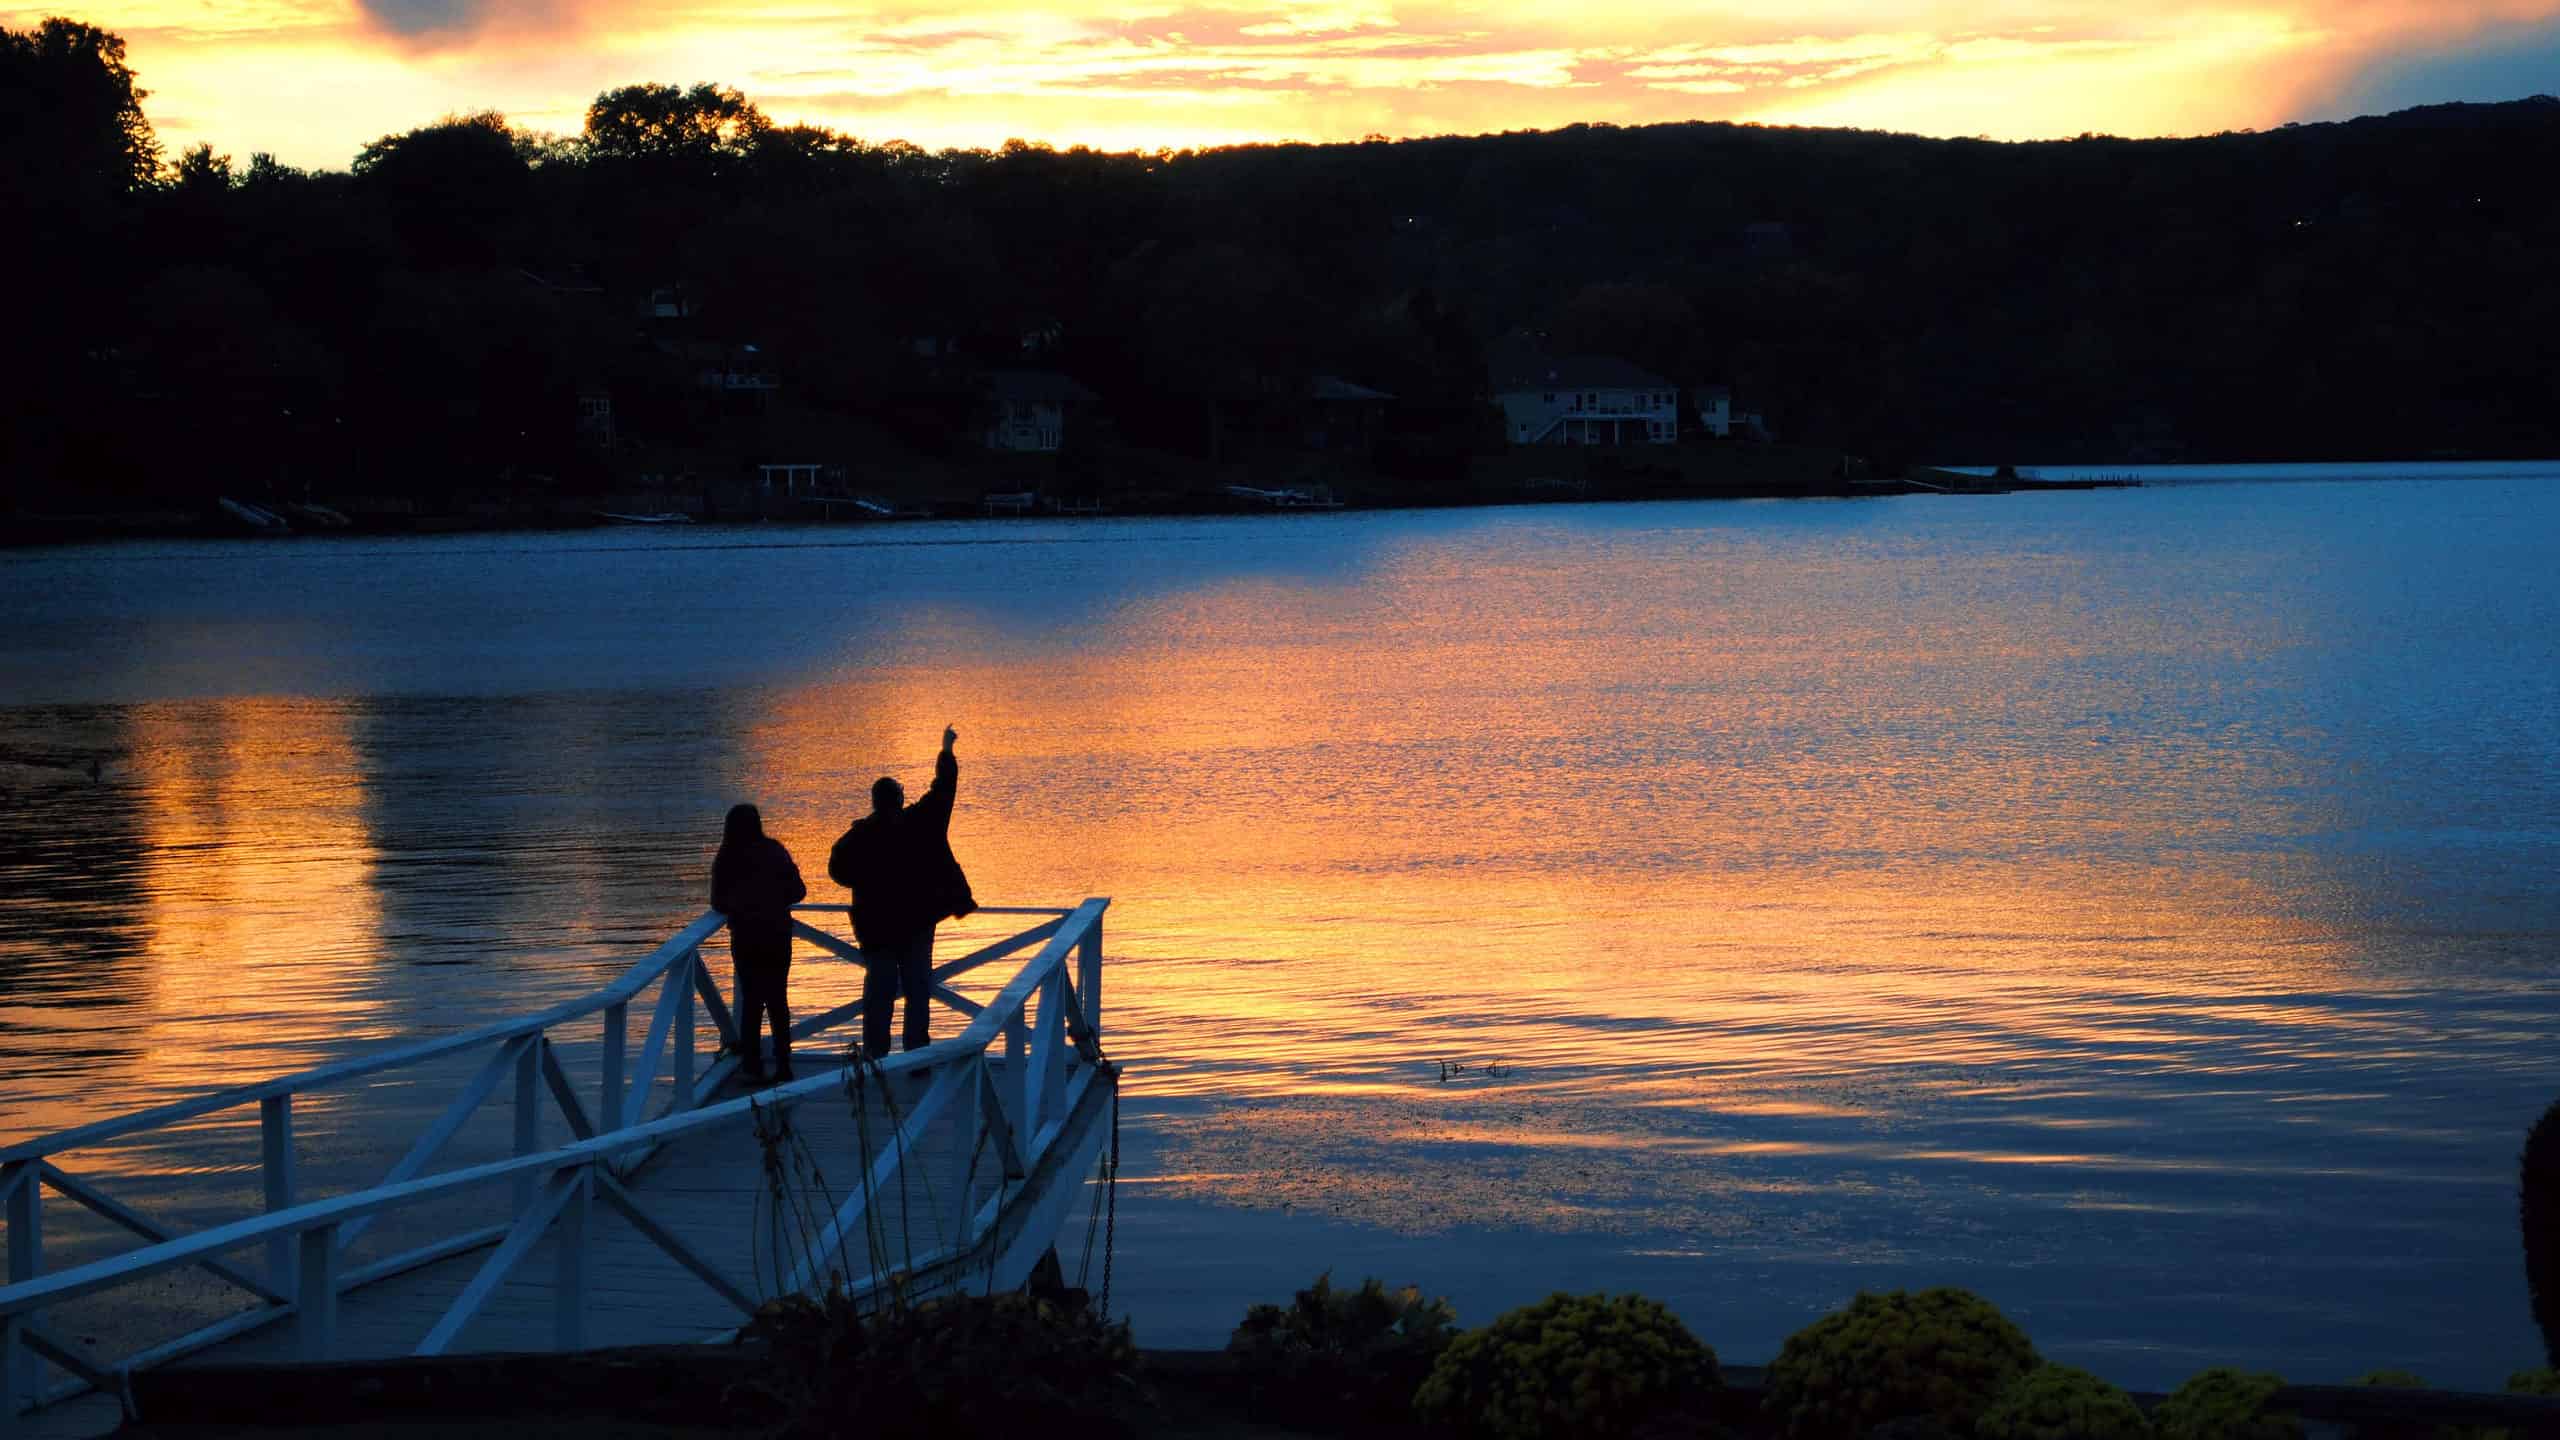 Viewing the Sunset over Candlewood Lake